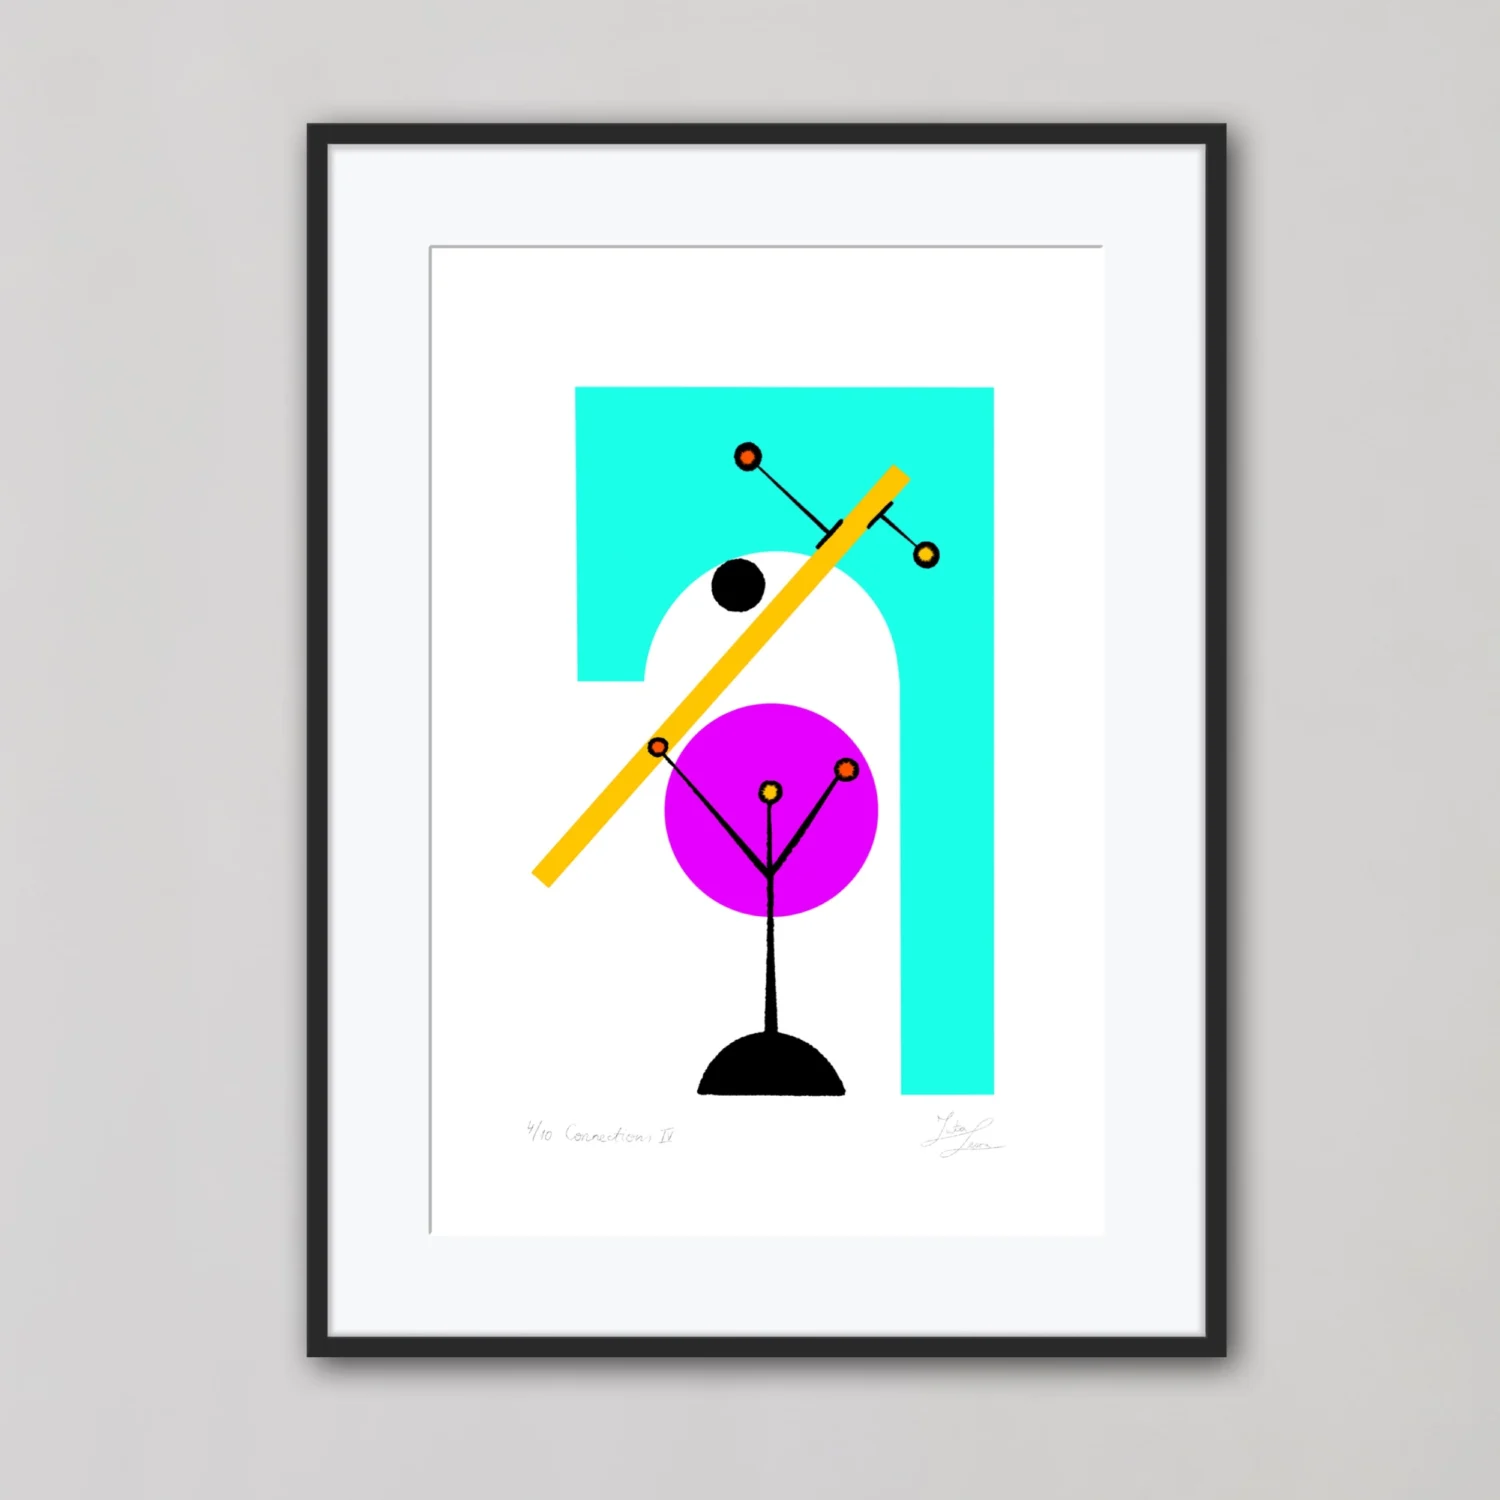 Geometric Abstraction Art Print Connections 1 by Inta Leora